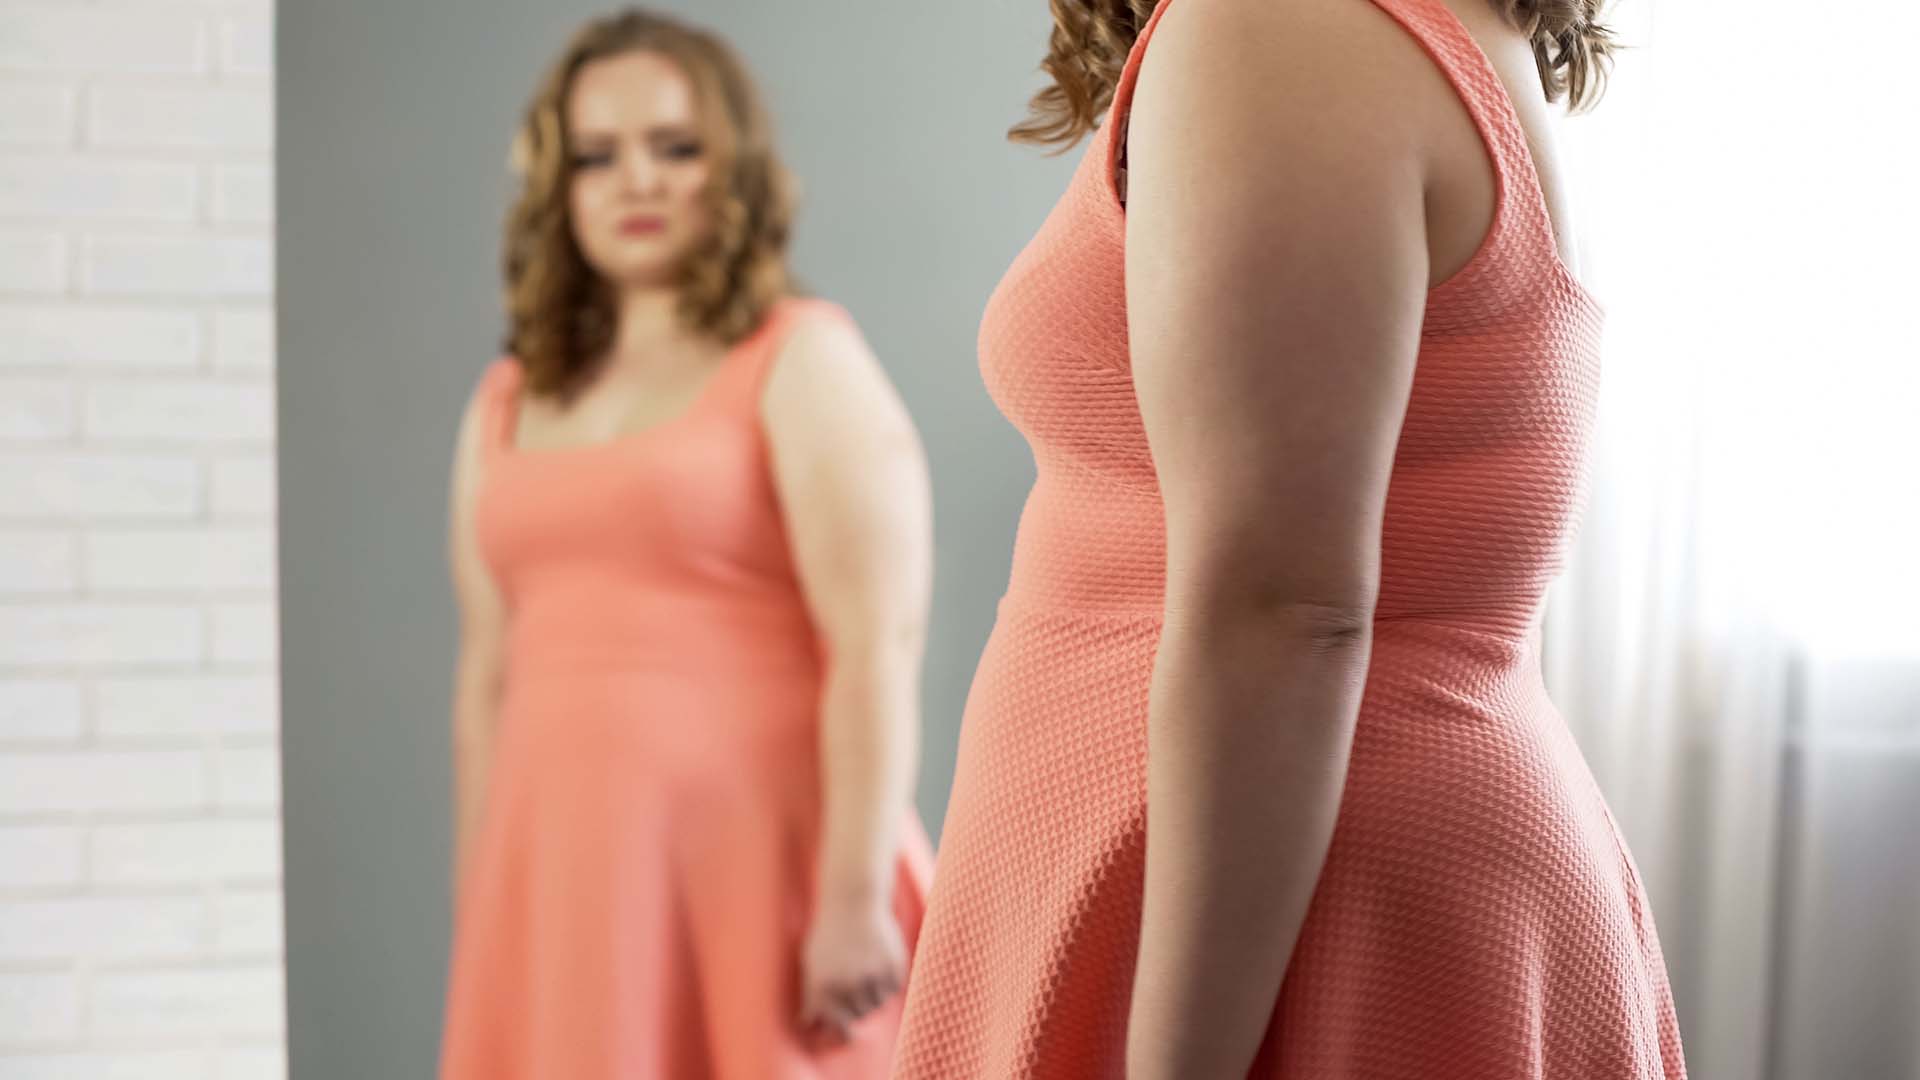 Blonde BBW in light coral dress standing in front of the mirror and looking sad. Window in the background.